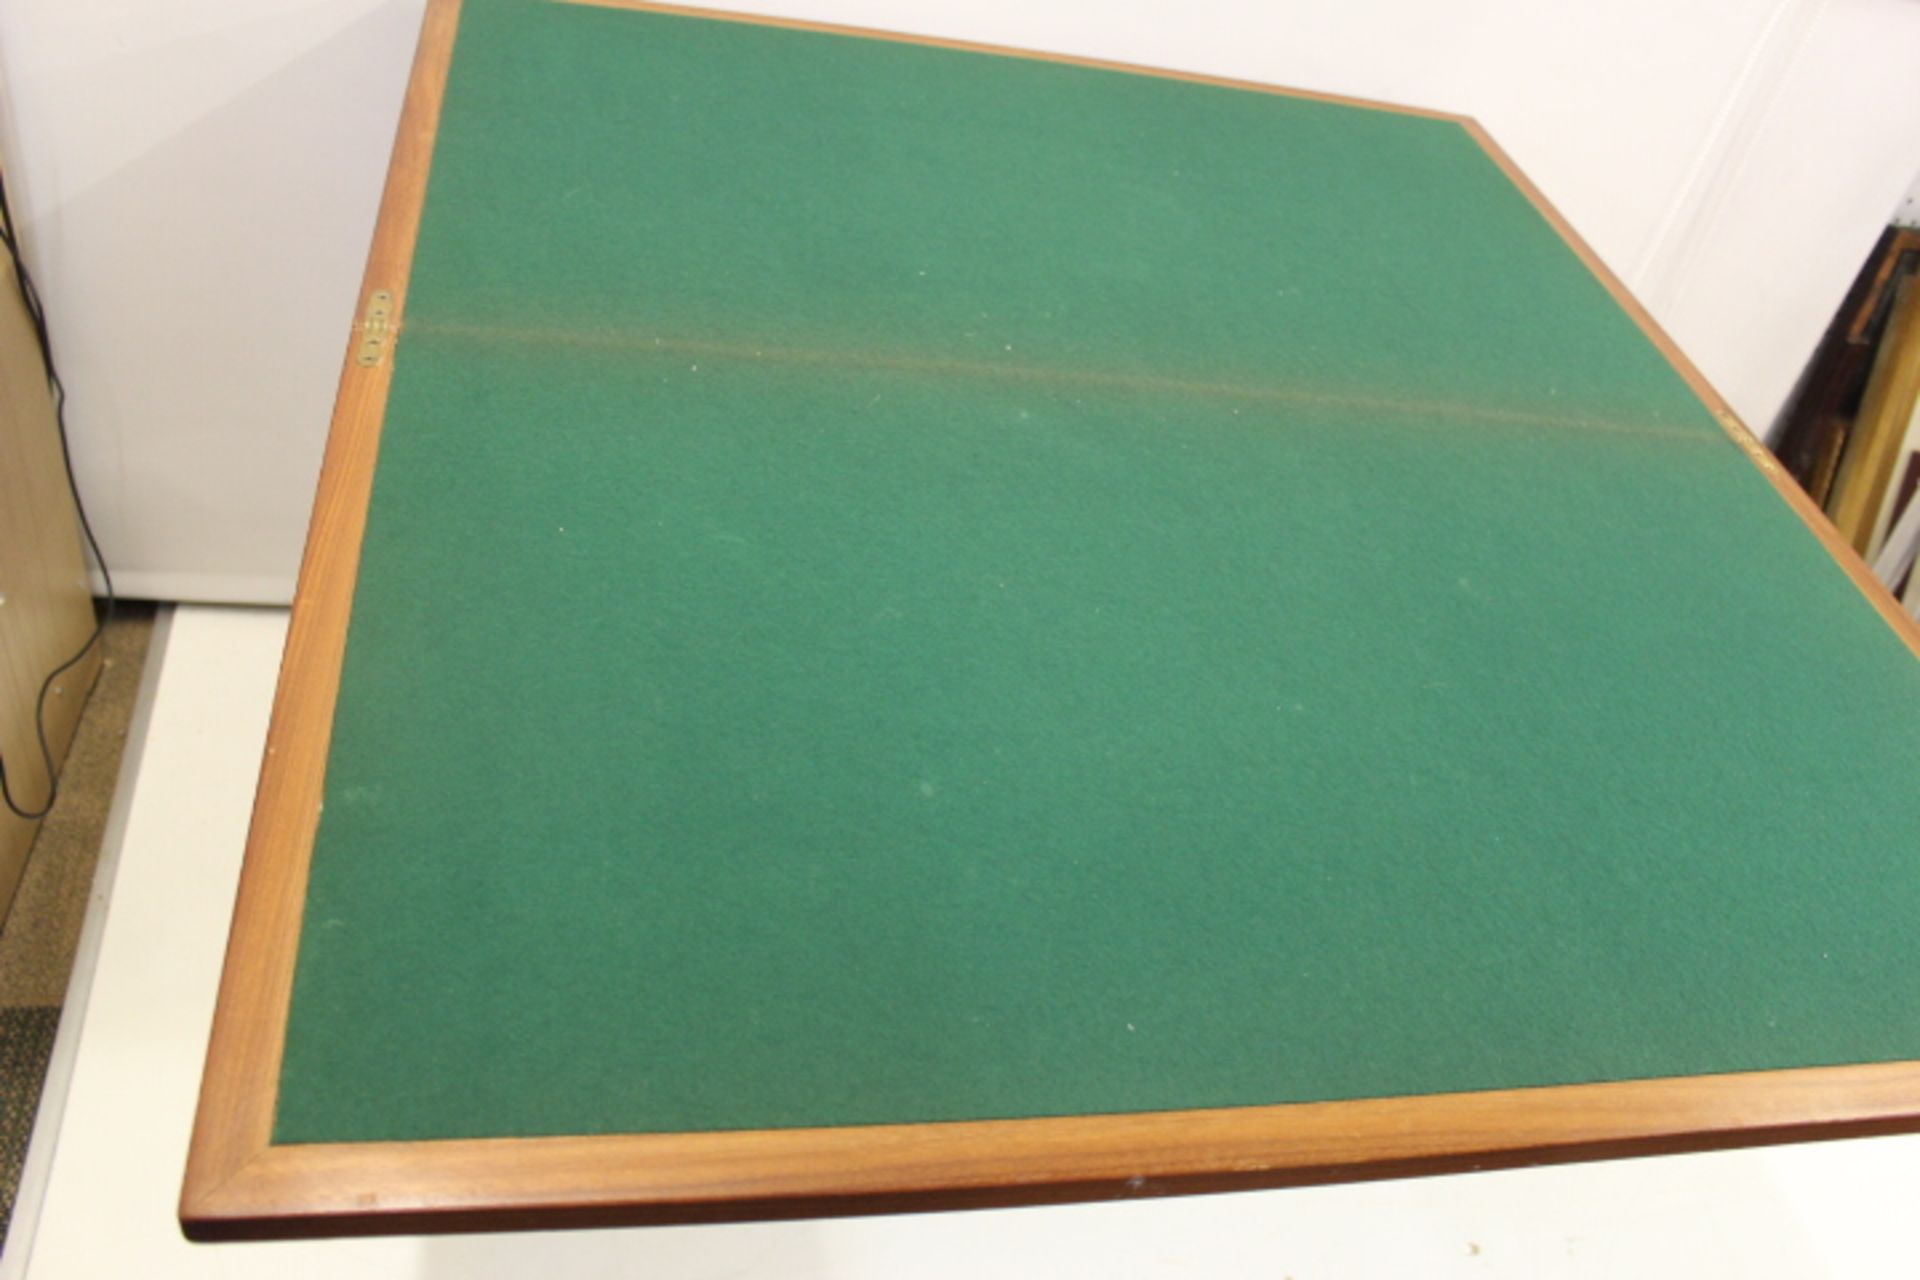 Vintage 70's Lightwood Card Table - Image 2 of 2